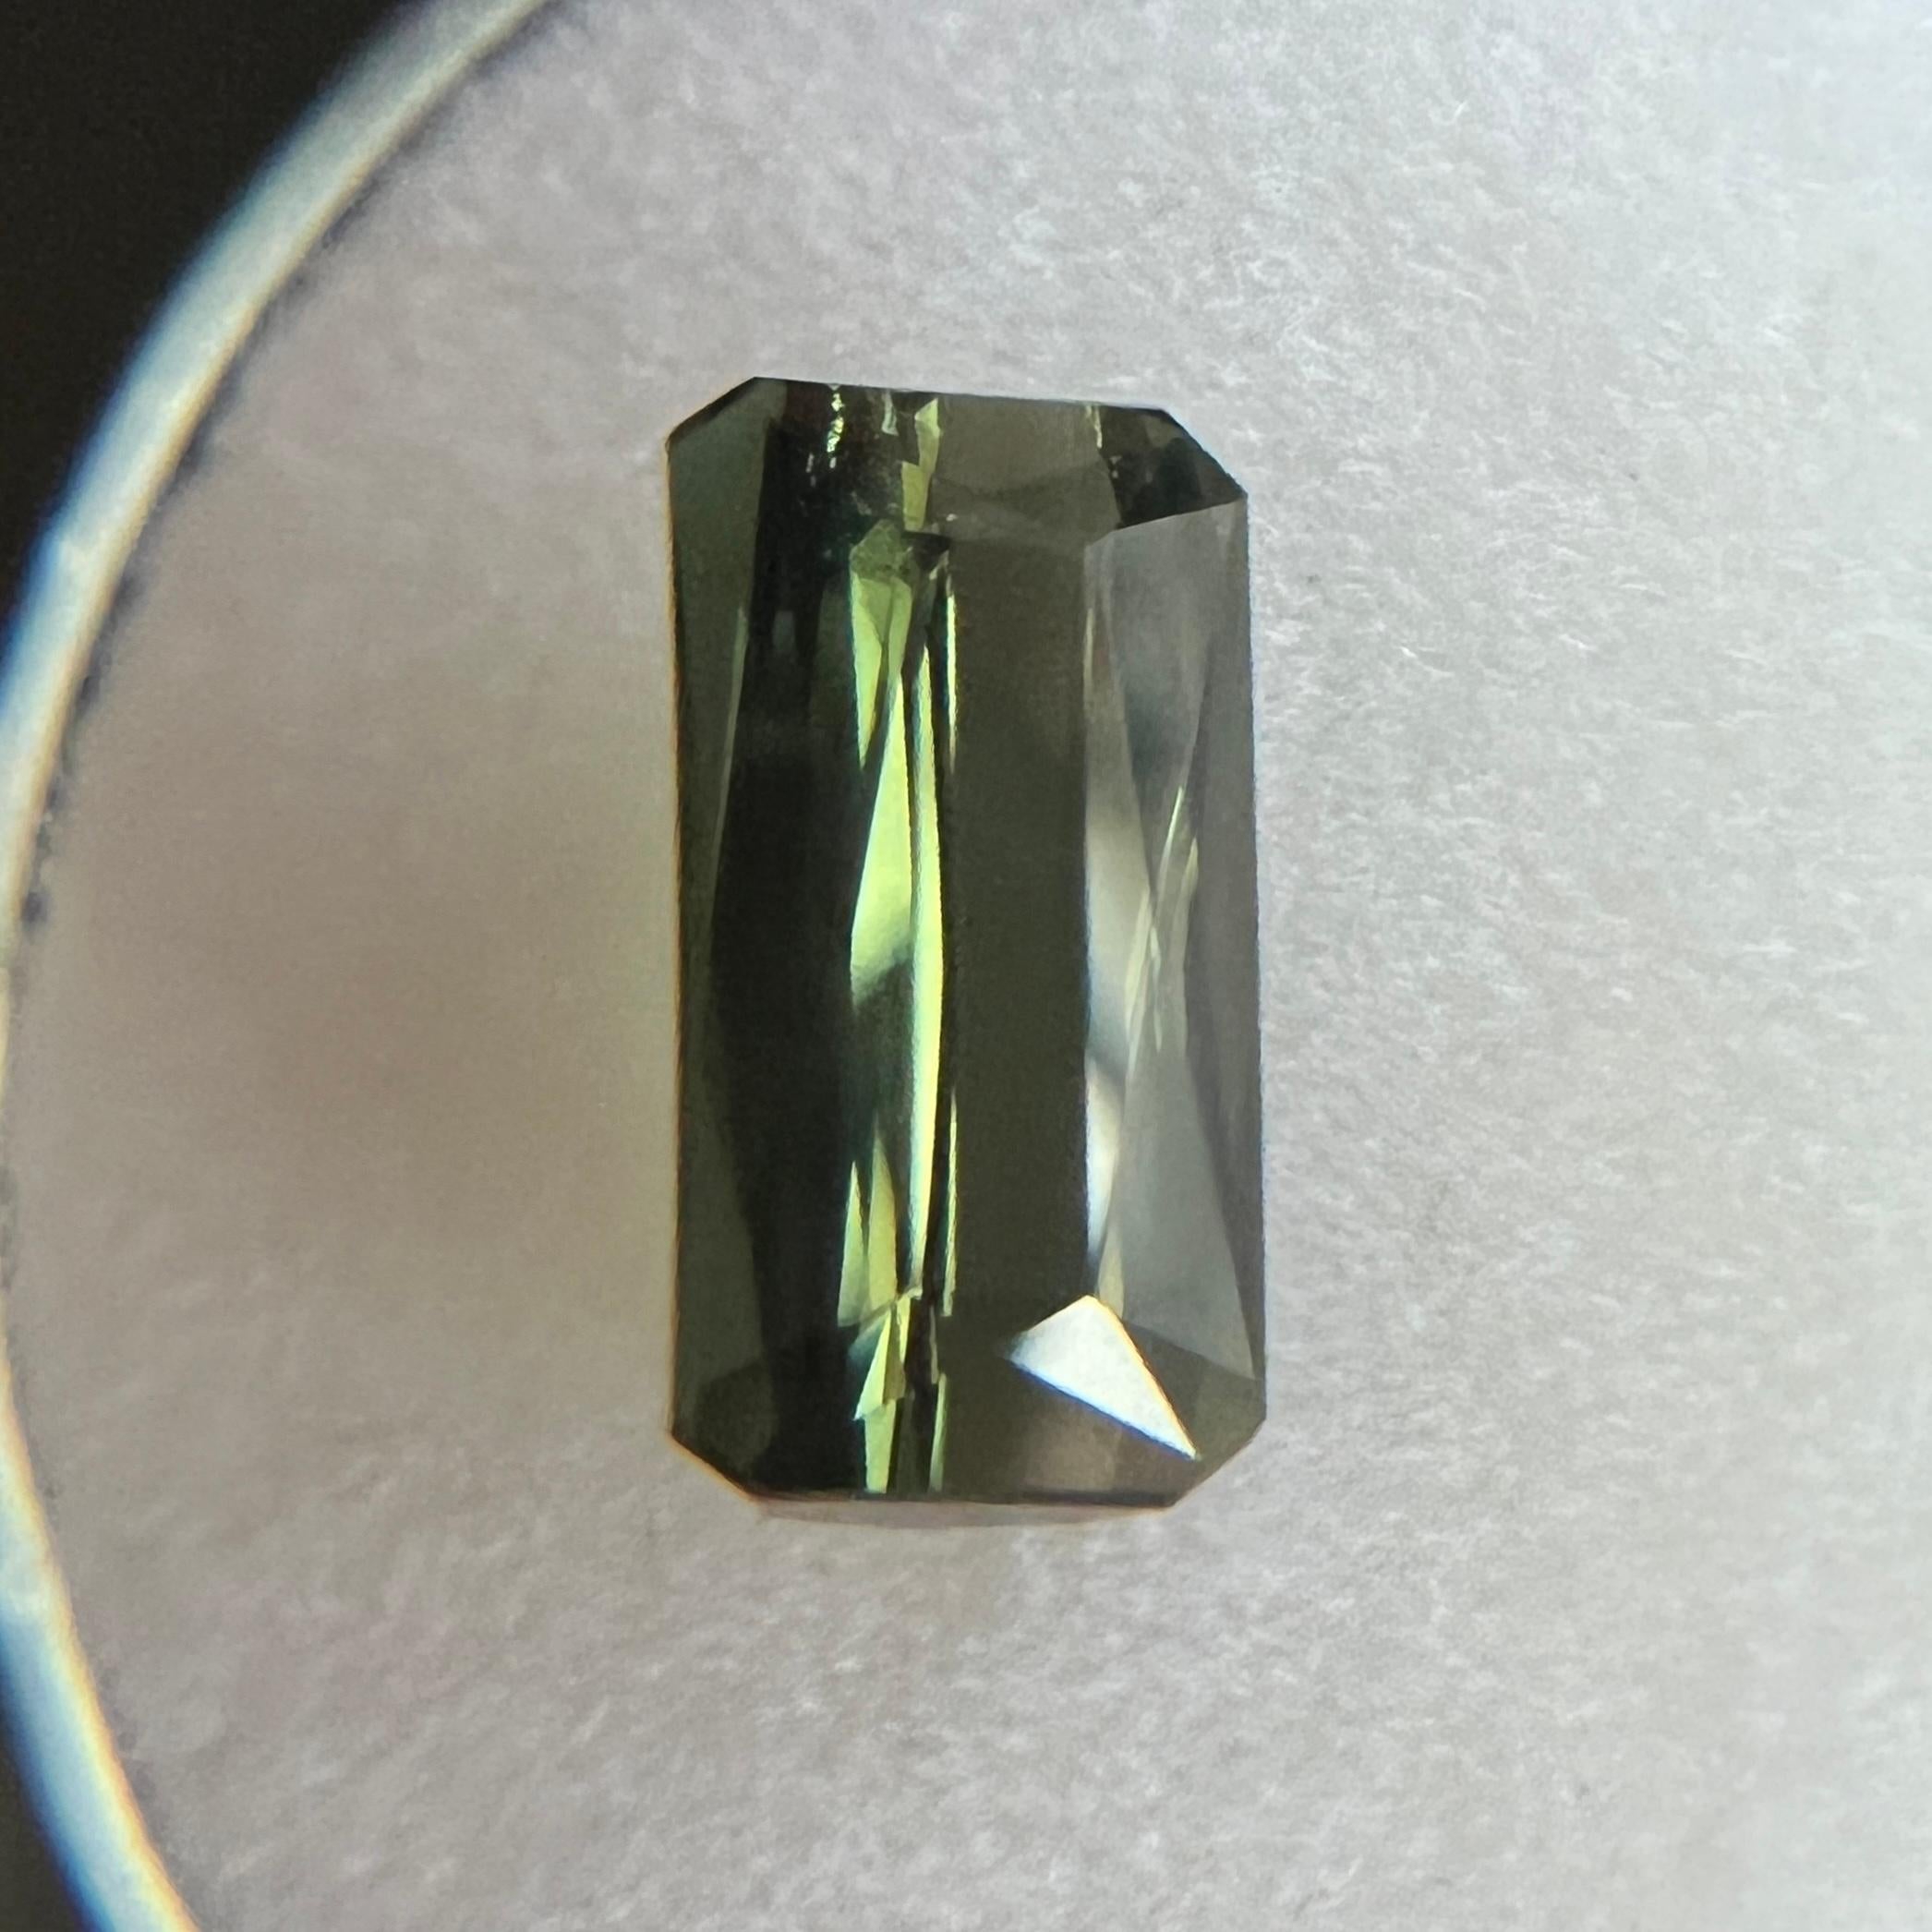 Fine Vivid Green Tourmaline Gemstone.

2.33 Carat with a beautiful and vibrant vivid green colour and excellent clarity, a very clean stone.

Also has an excellent fancy scissor emerald/octagon cut with good proportions and symmetry. Shows lots of